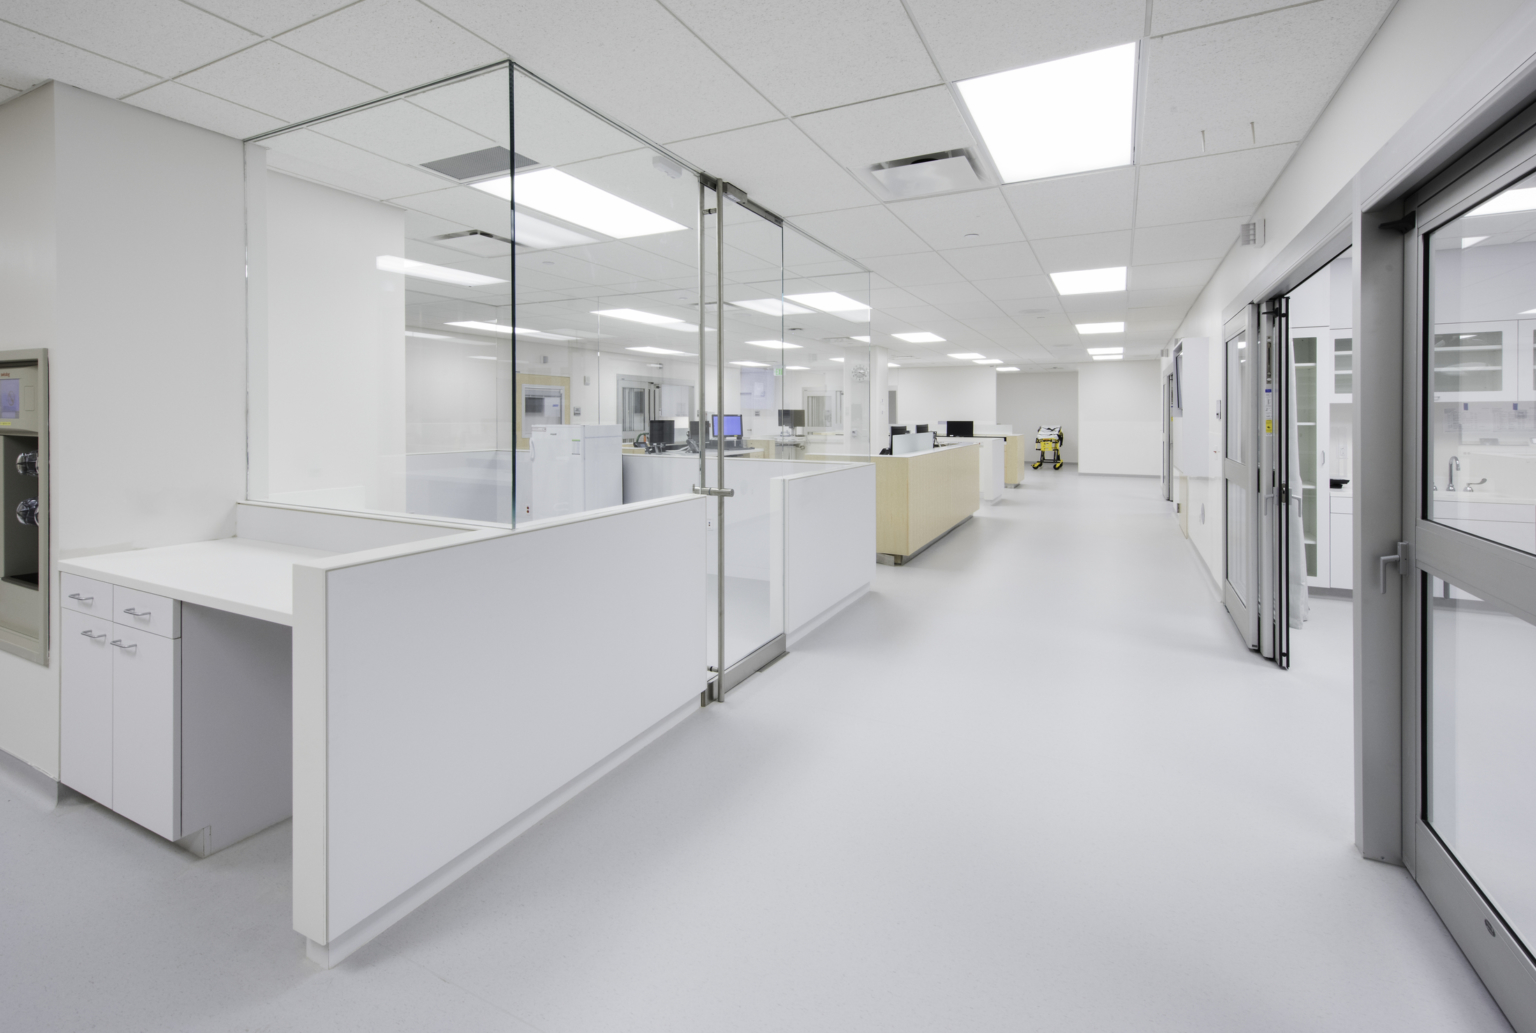 a corridor that separates nursing stations from patient rooms